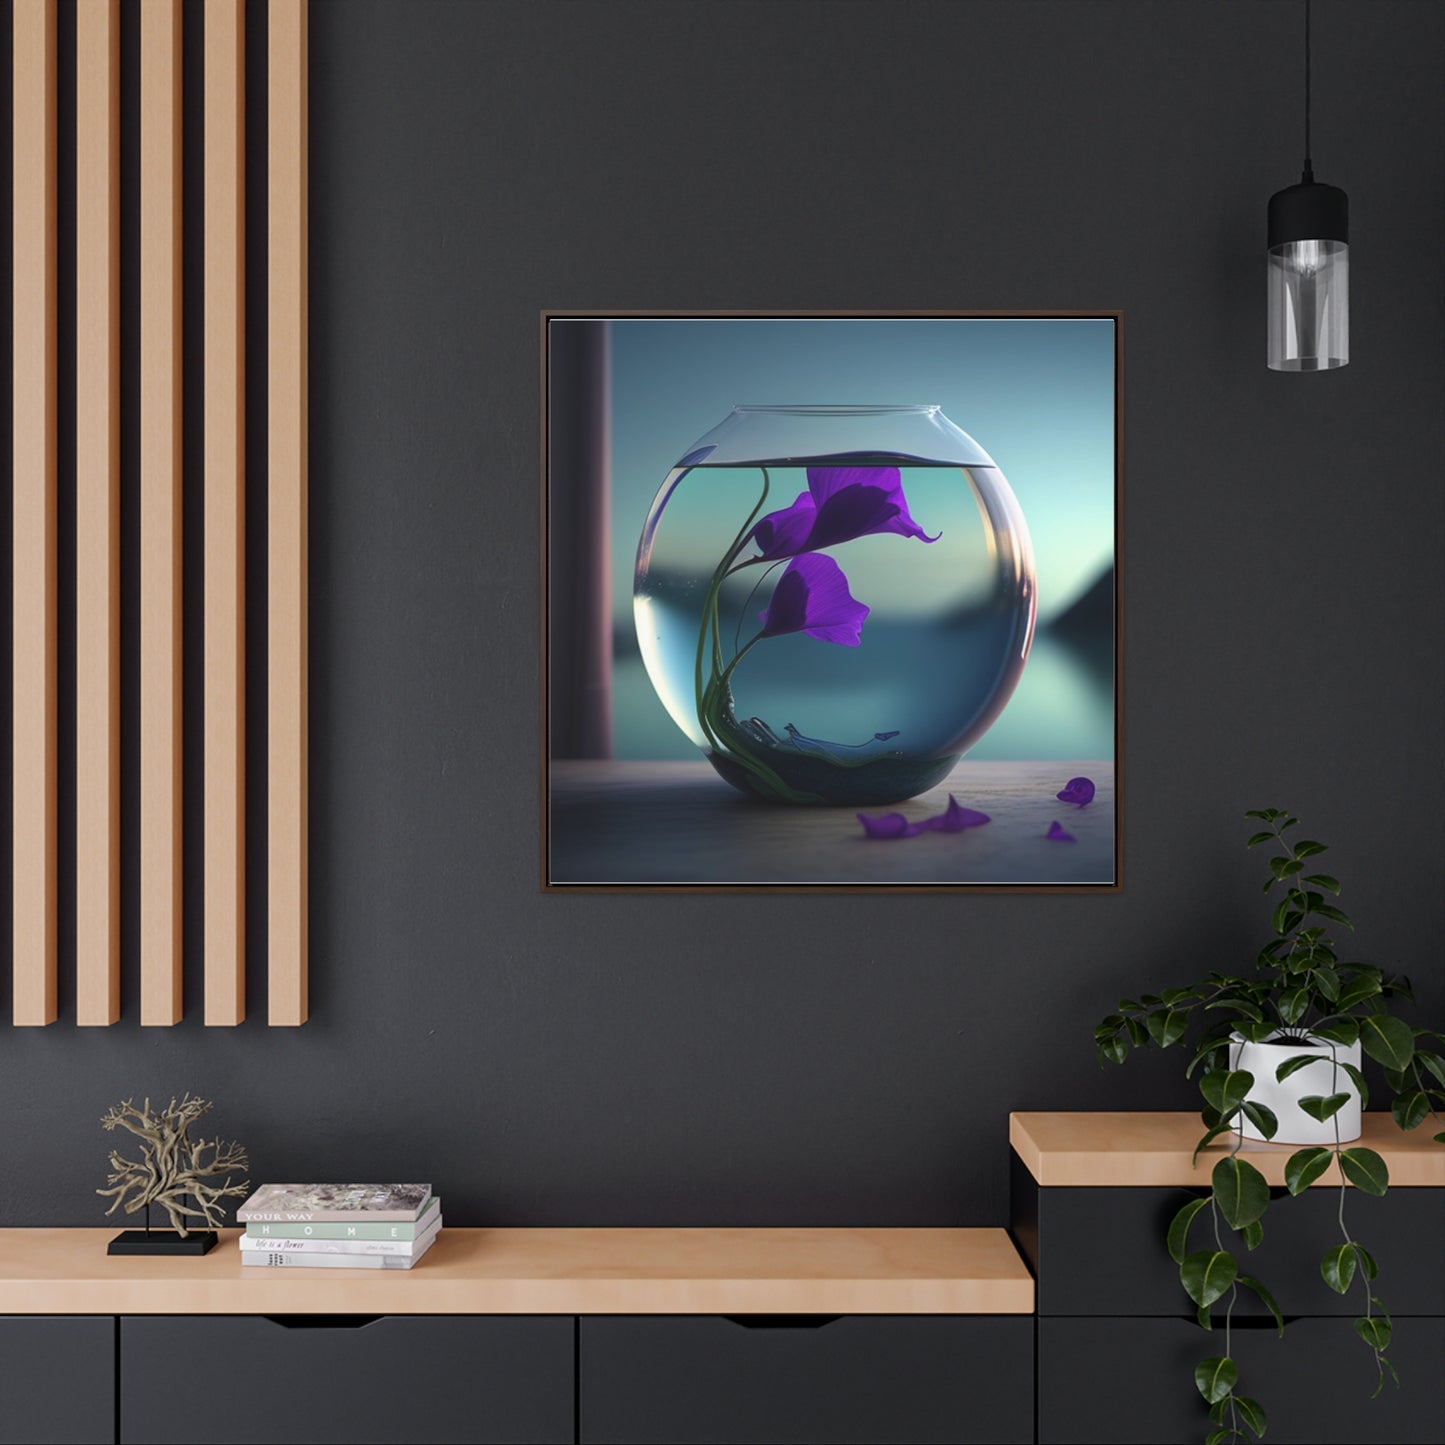 Gallery Canvas Wraps, Square Frame Purple Sweet pea in a vase 2